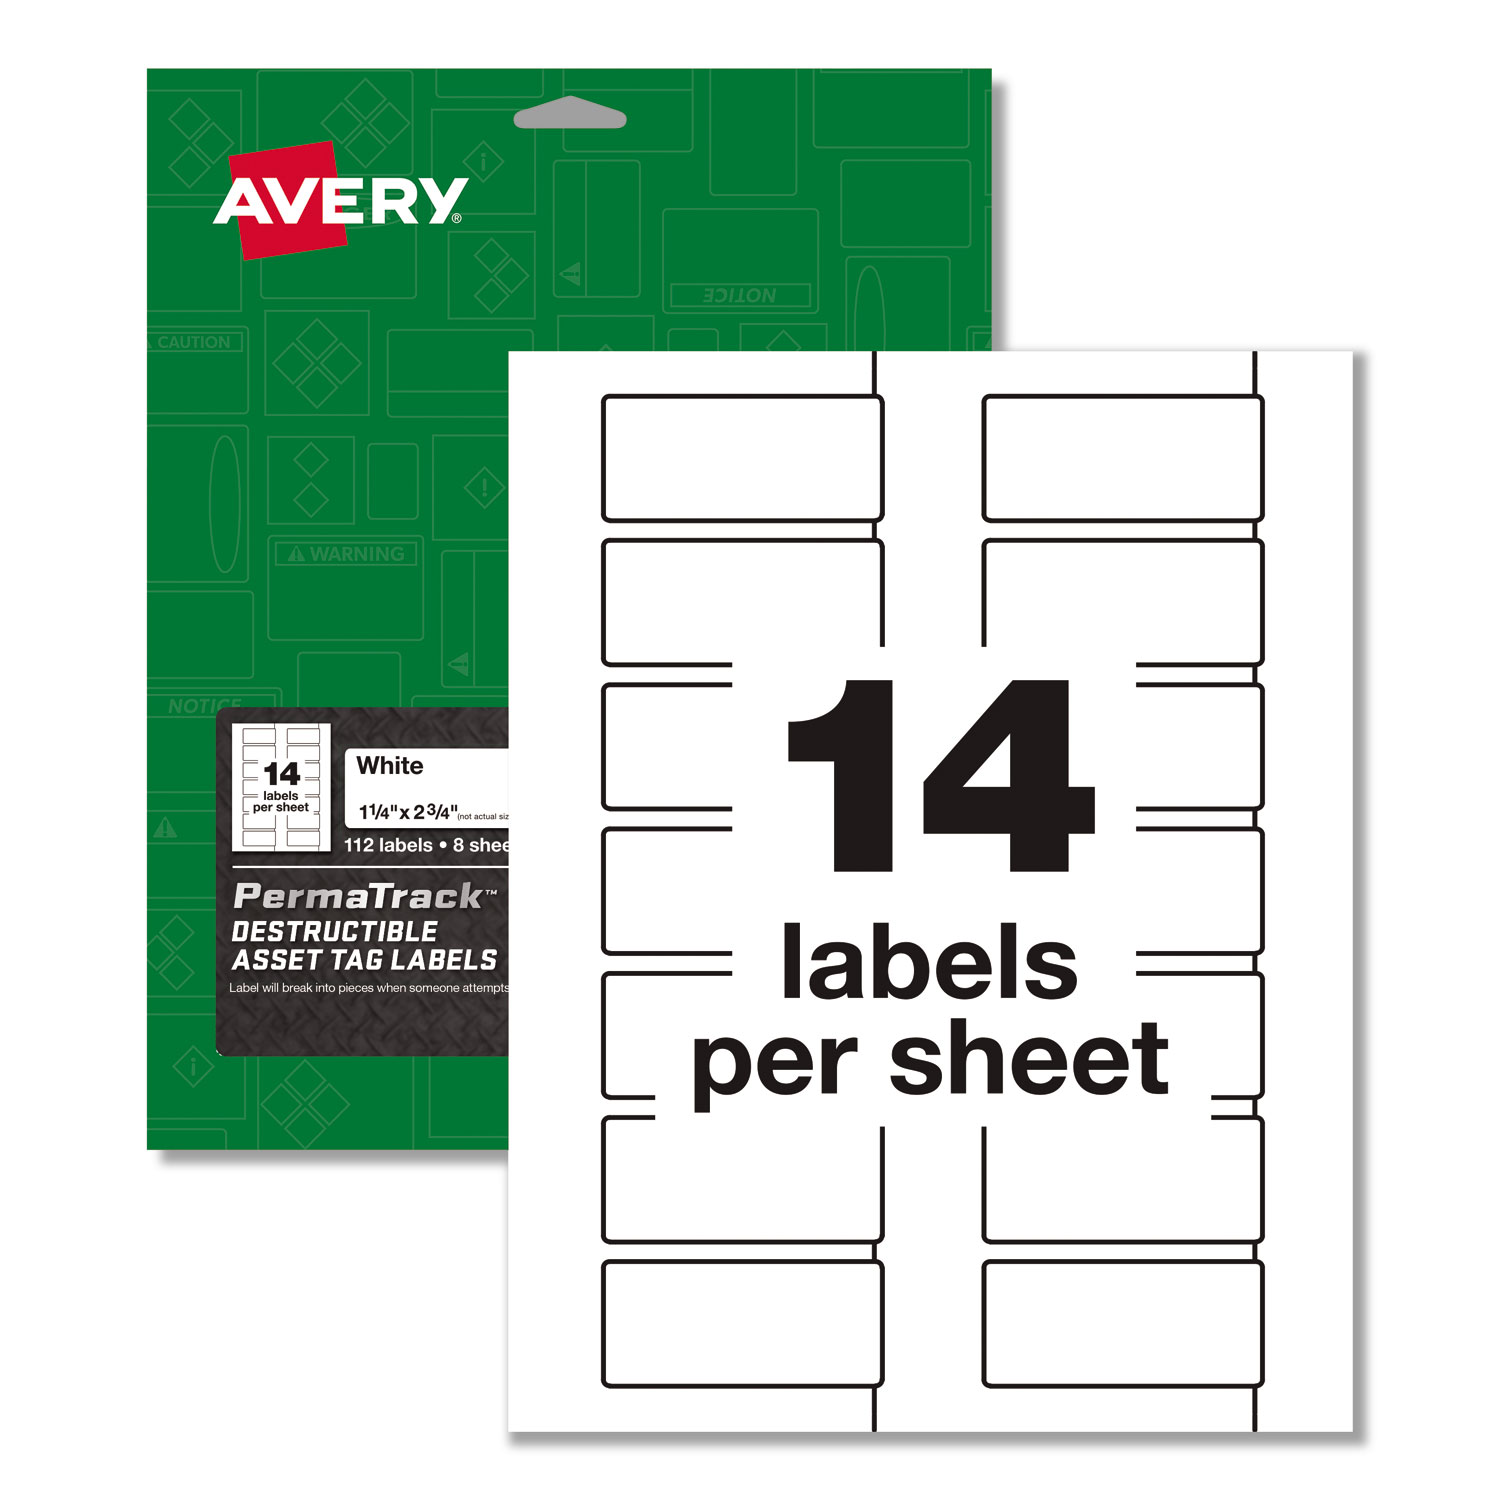  Avery 60537 PermaTrack Destructible Asset Tag Labels, Laser Printers, 1.25 x 2.75, White, 14/Sheet, 8 Sheets/Pack (AVE60537) 